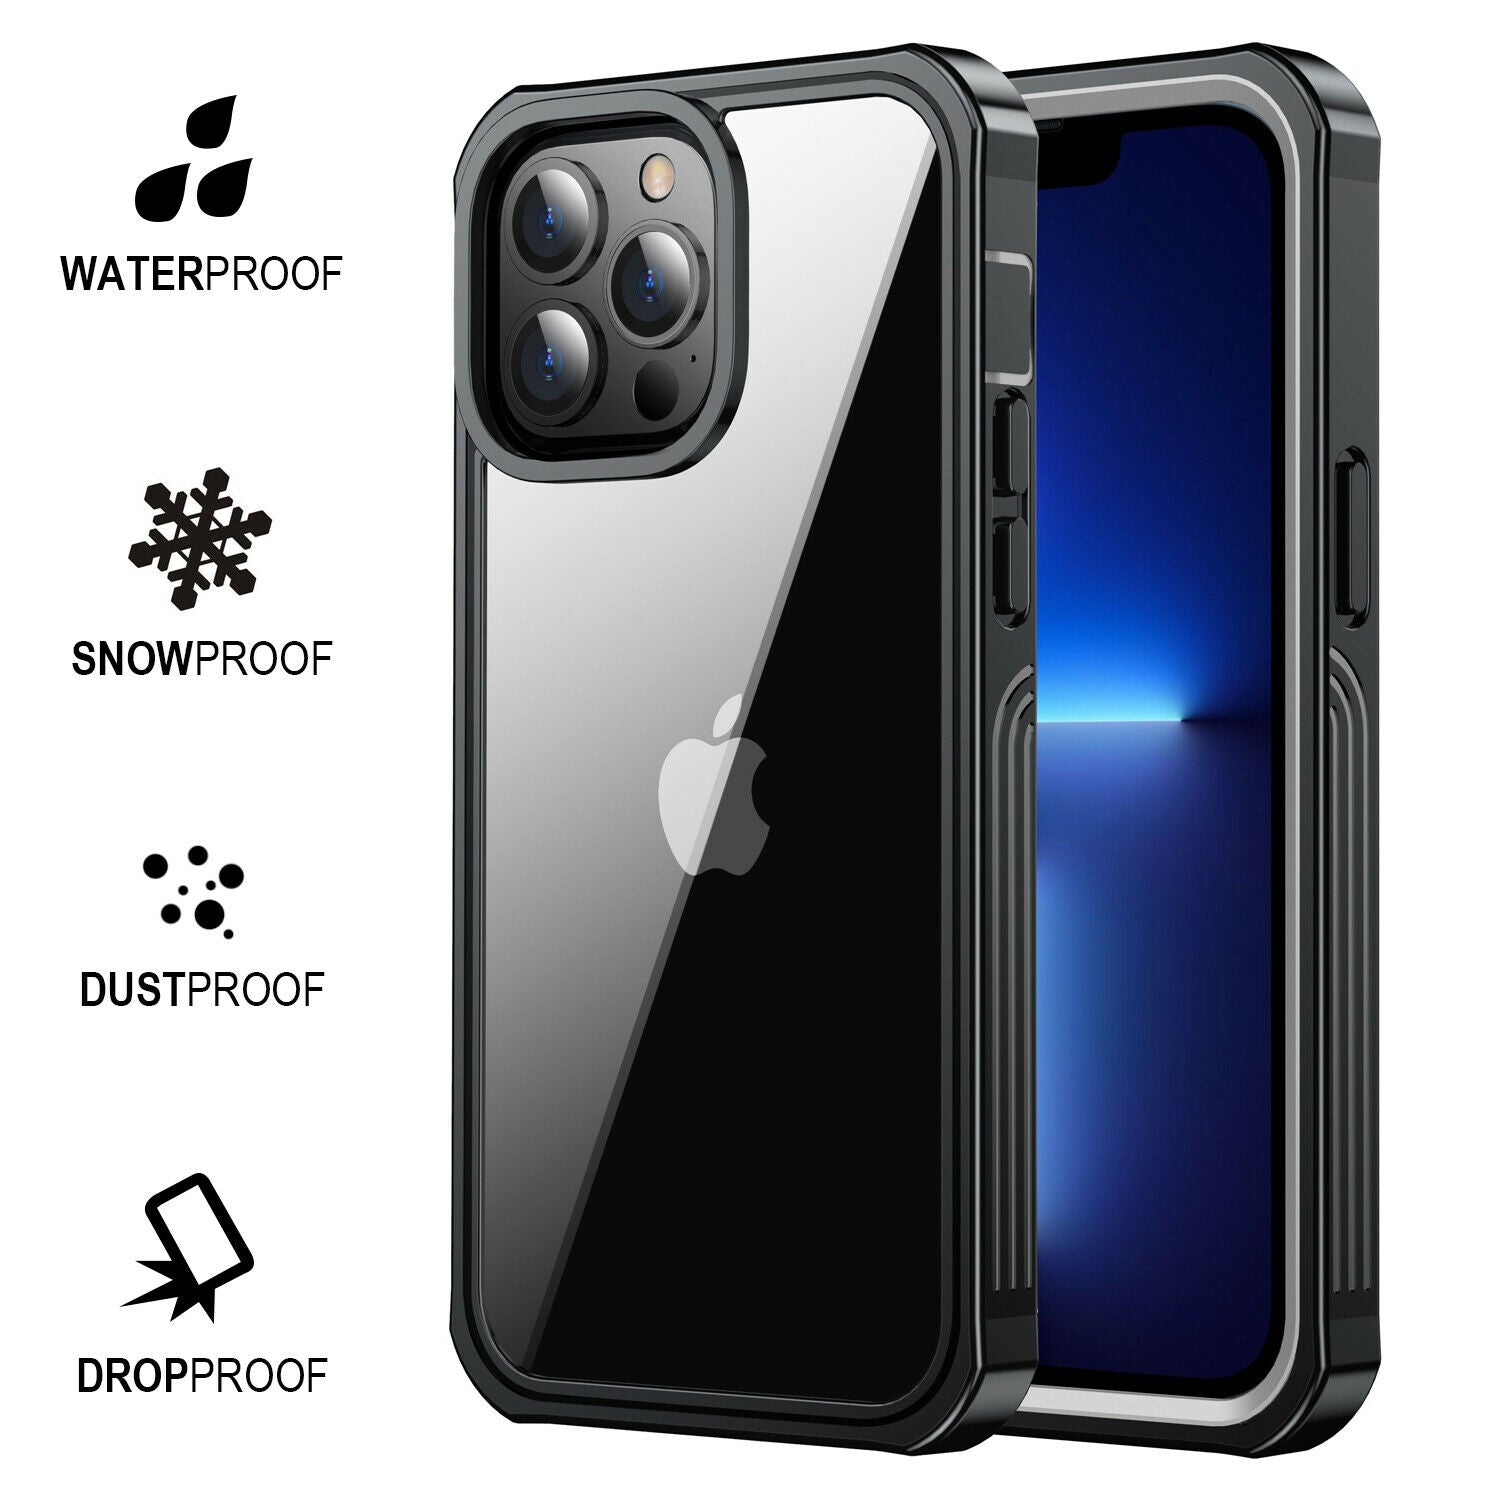 Dust/Shock/Waterproof IP68 Rugged Protective Case for iPhone 13 Pro Max (6.7")